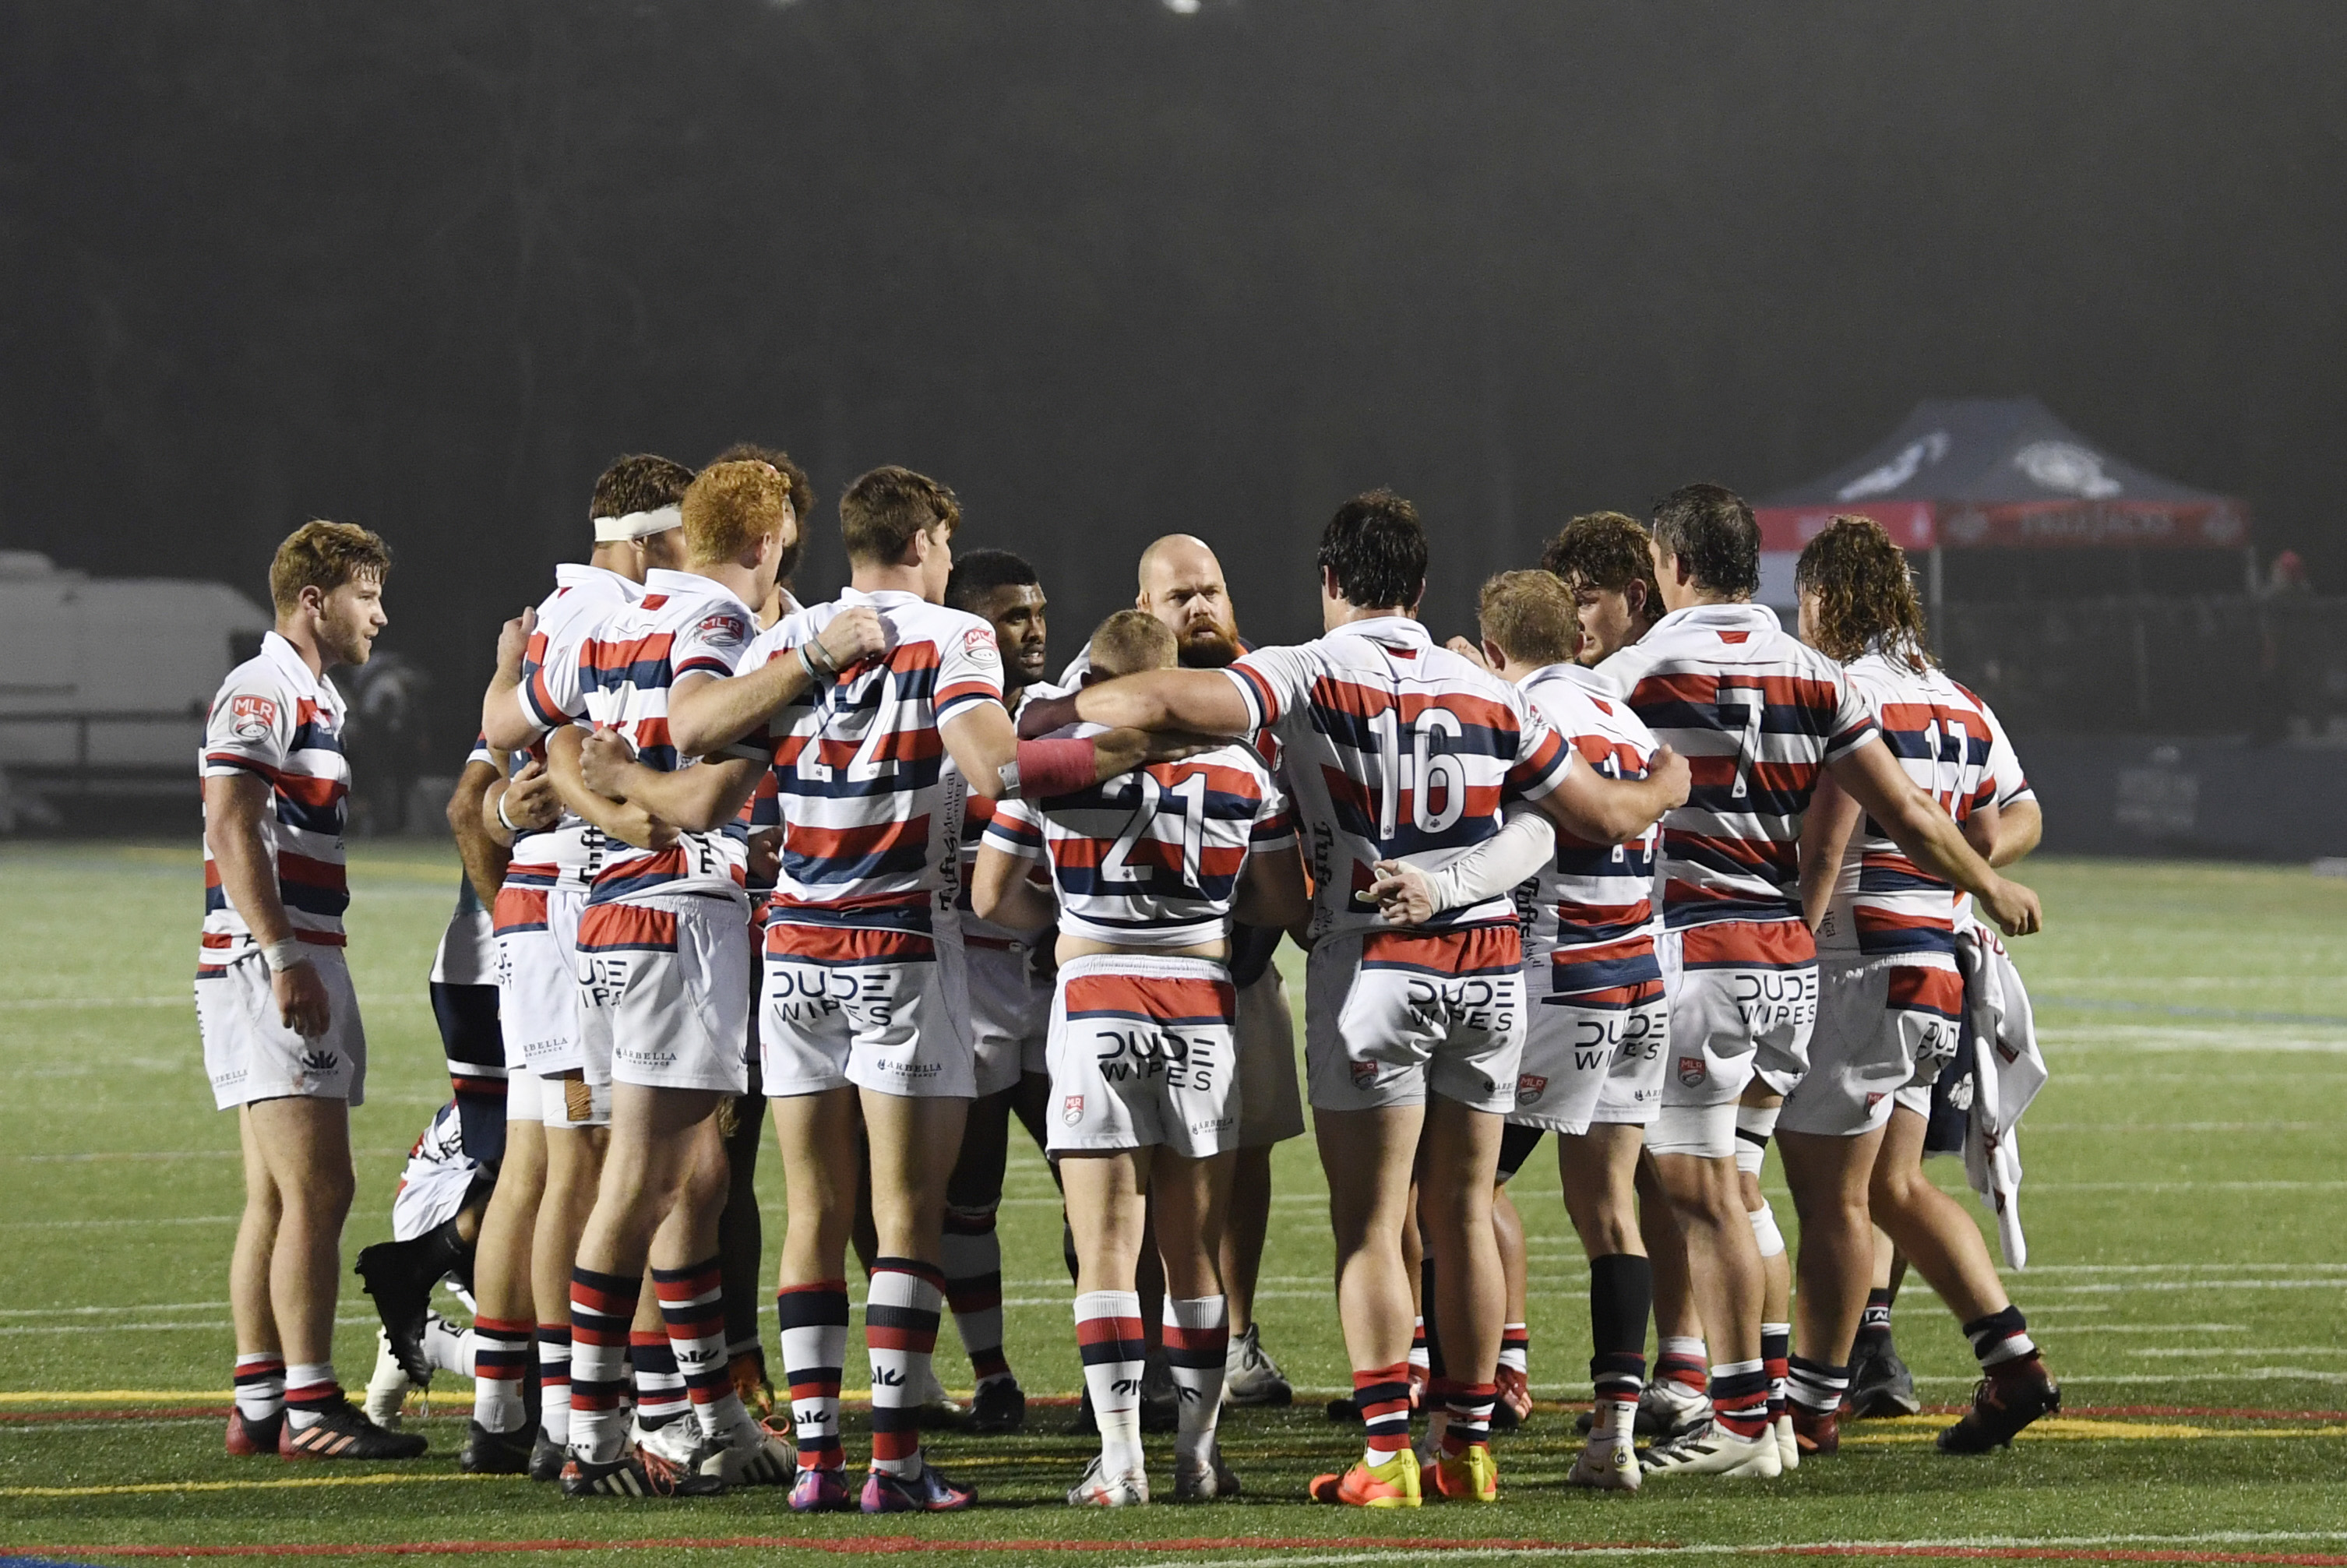 New England Free Jacks win Major League Rugby Championship Final in Chicago  - Major League Rugby